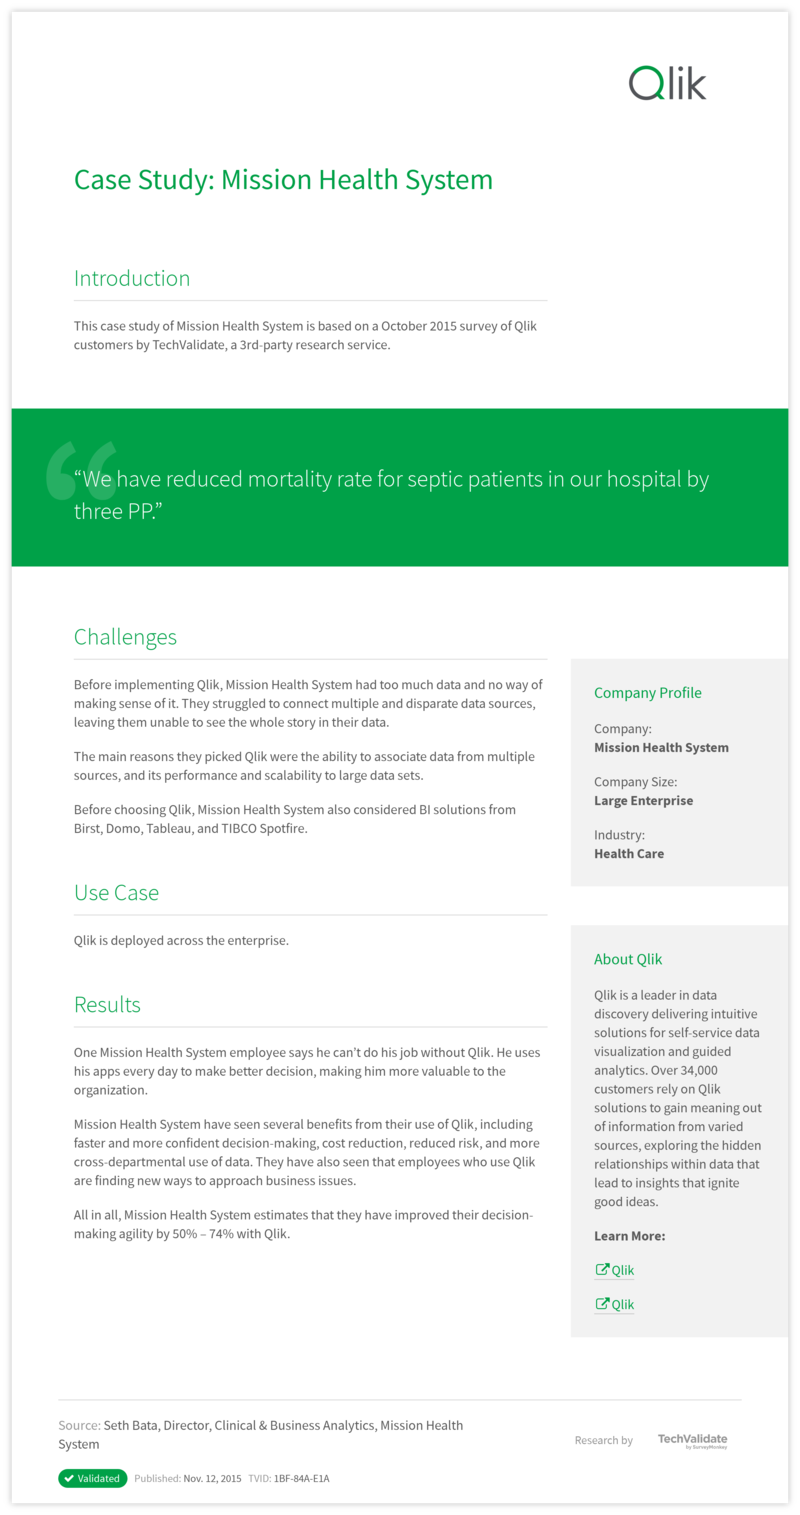 Case Study: Mission Health System